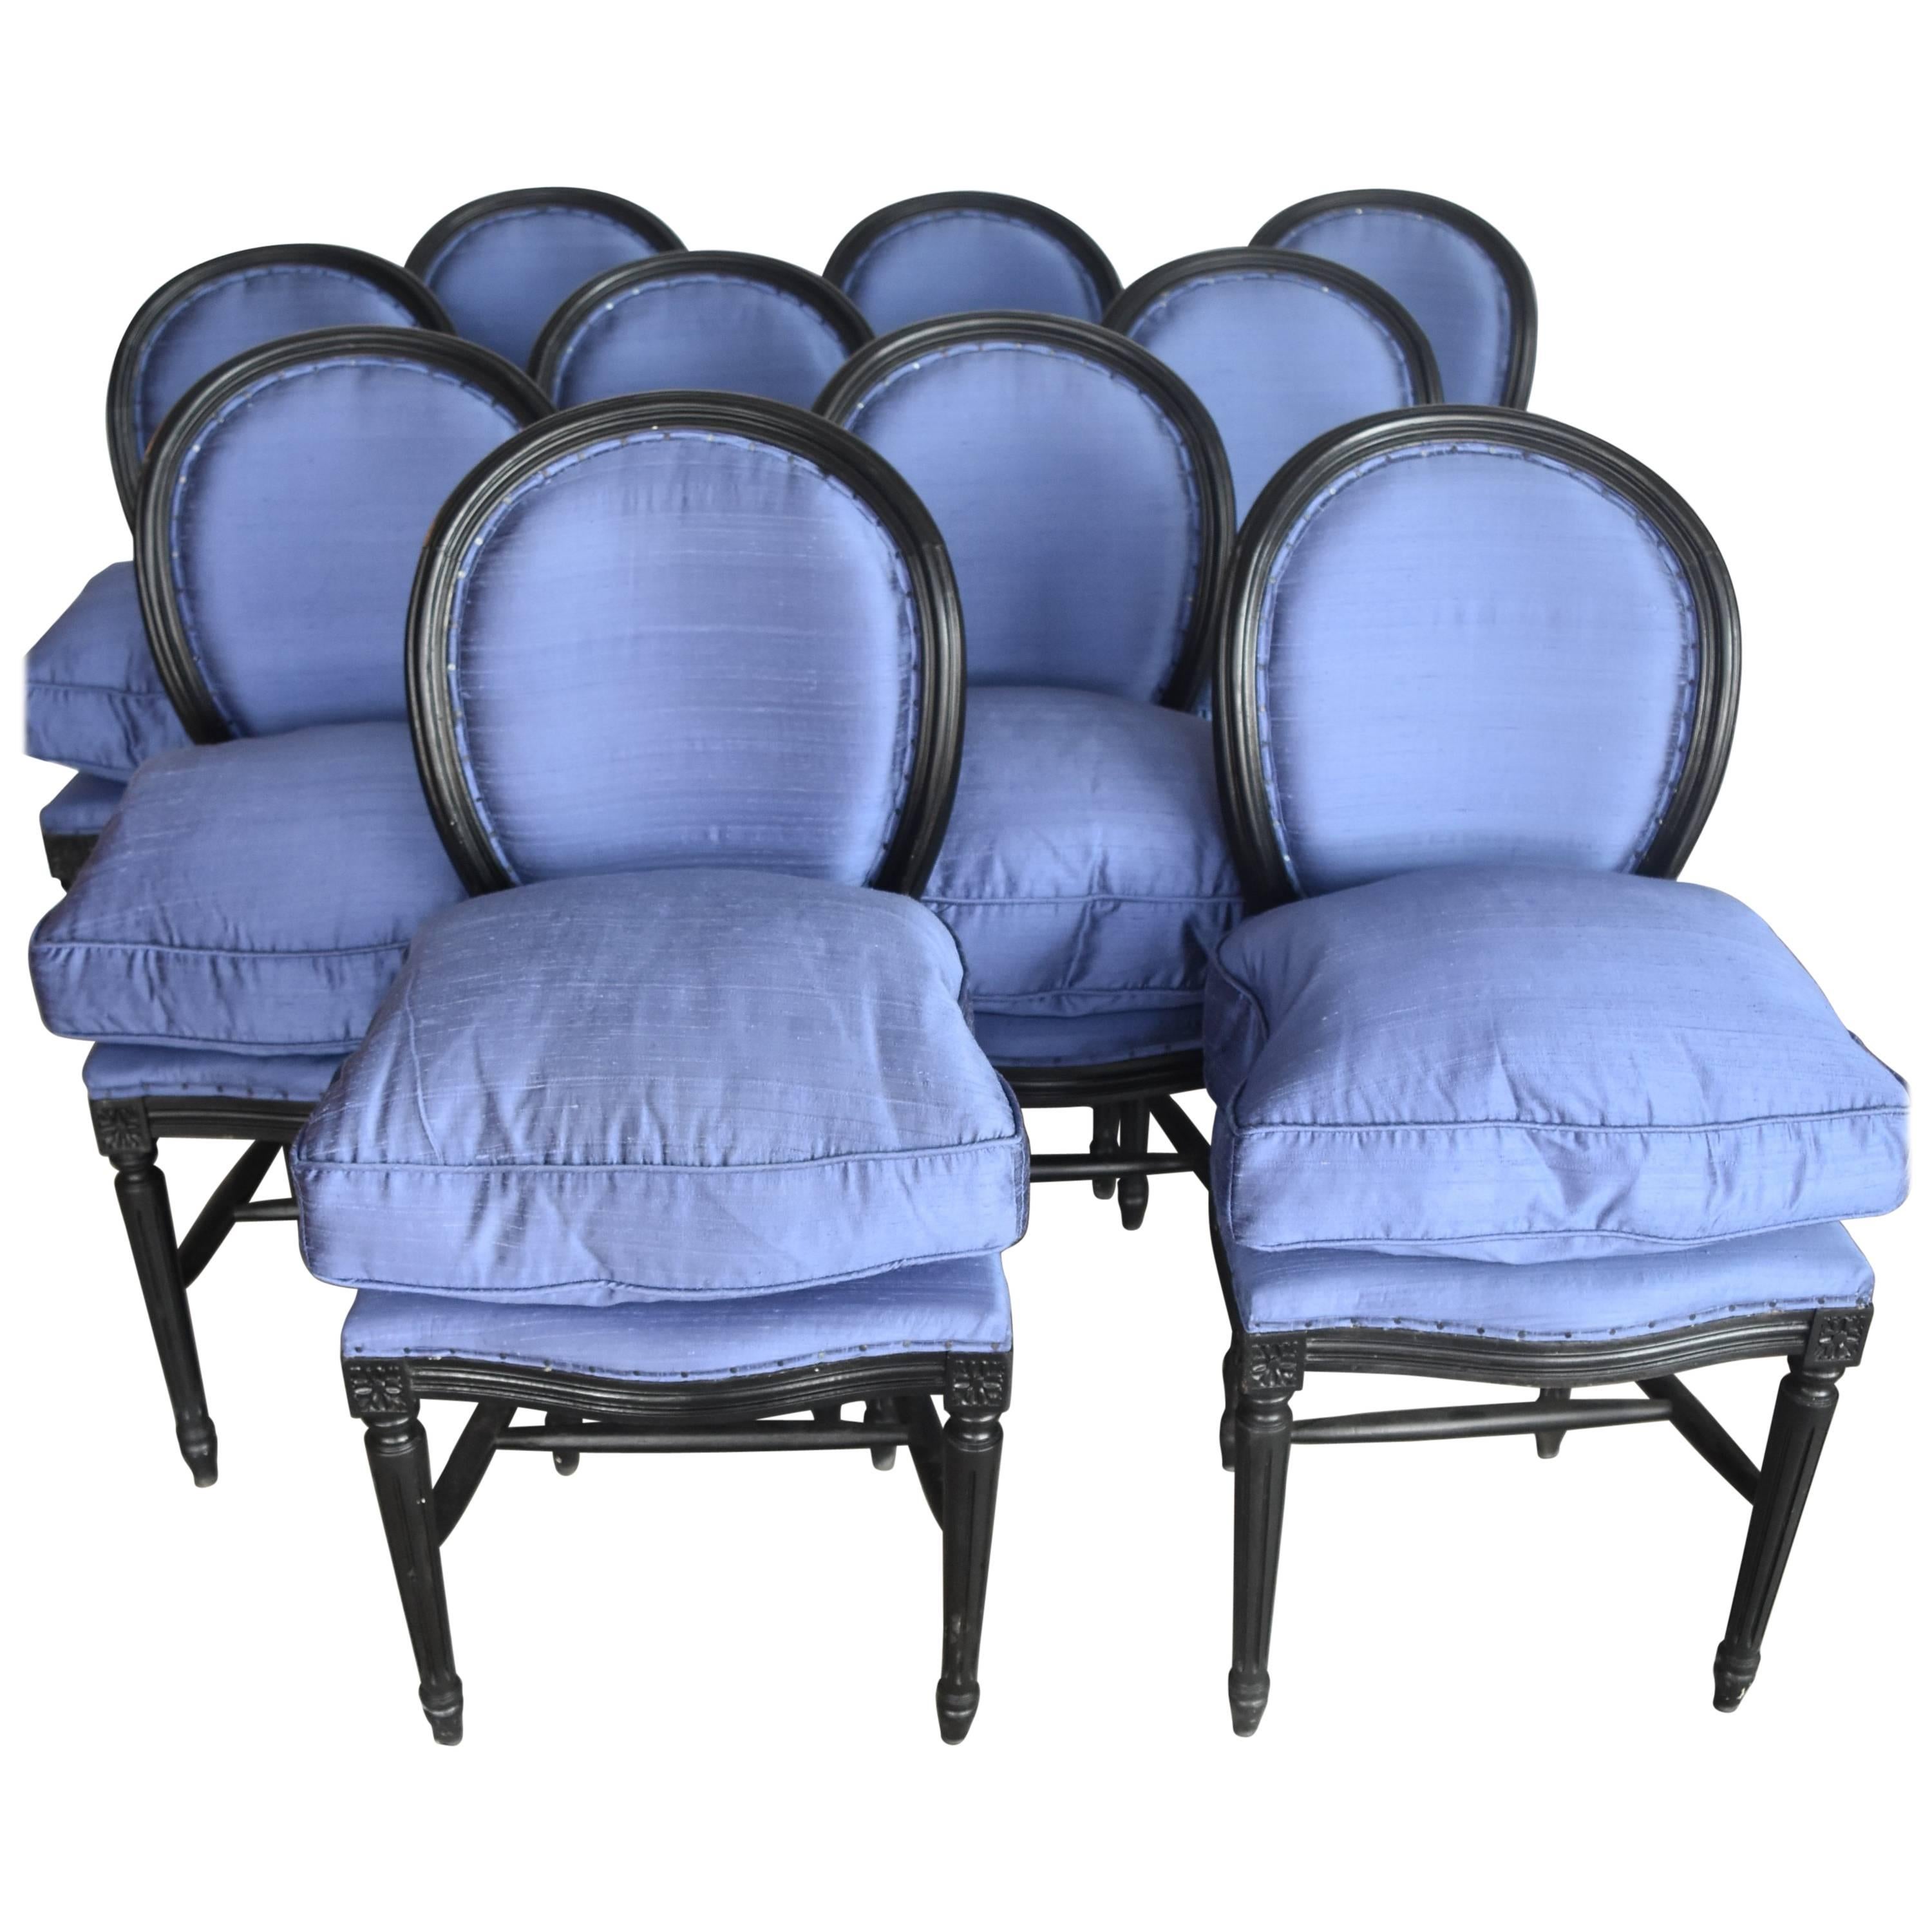 French 1920 Louis XVI Set of Ten Round Back Chairs with Dupioni Silk Upholstery